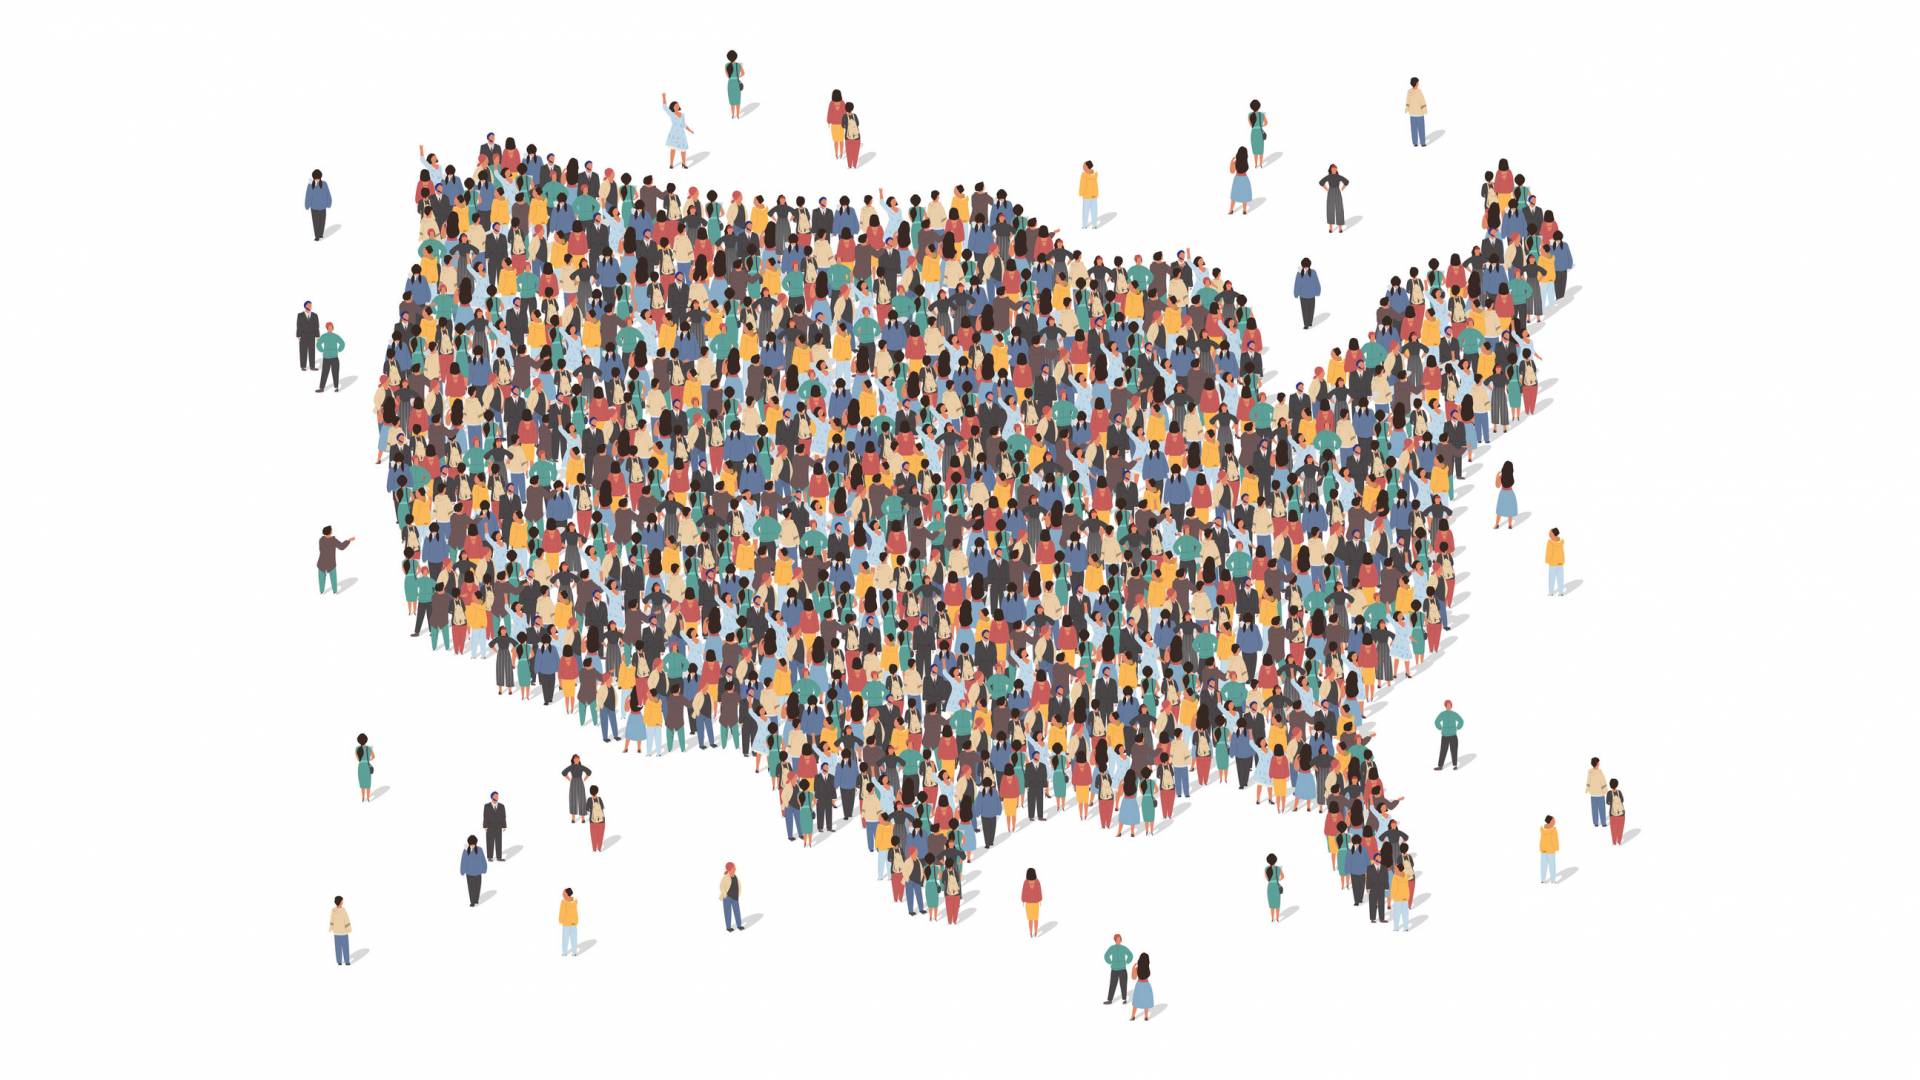 Decorative image of people gathered in the shape of the U.S.